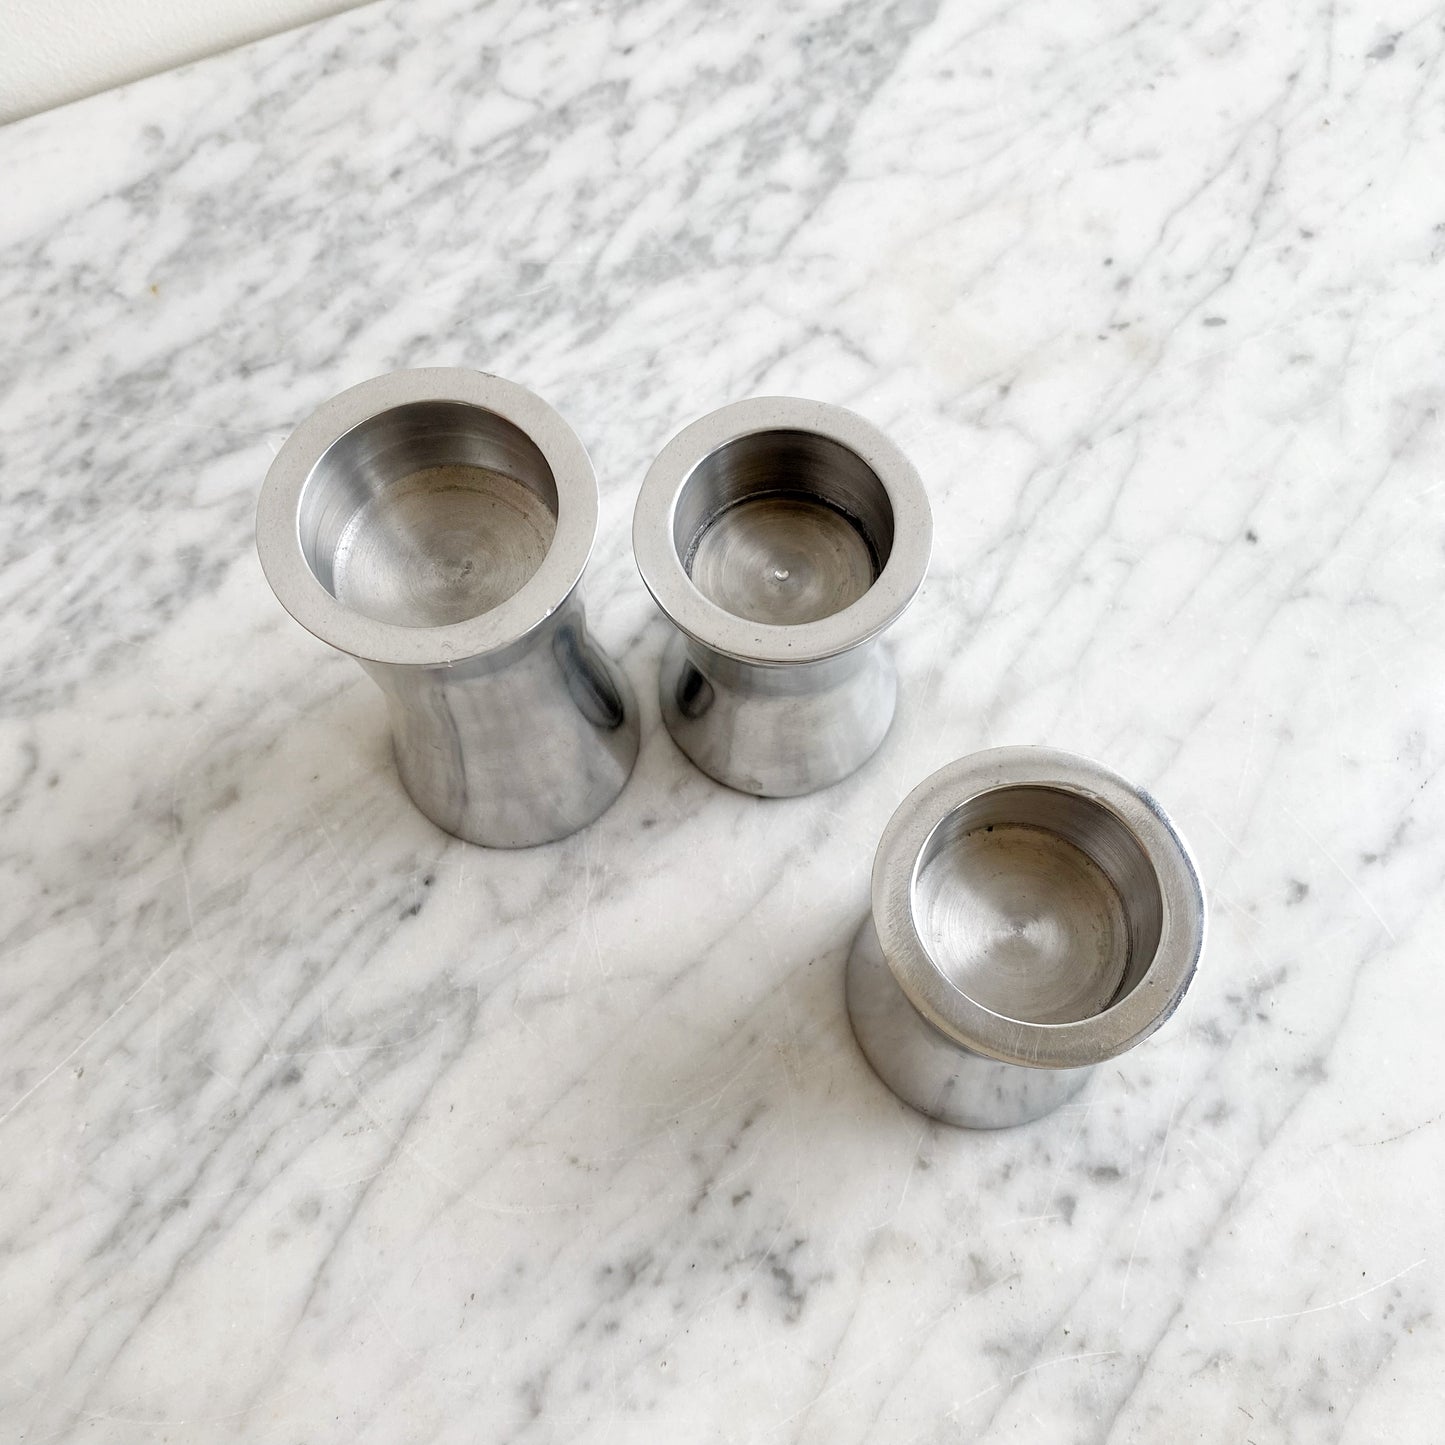 Trio of Found Silver Mod Candle Holders